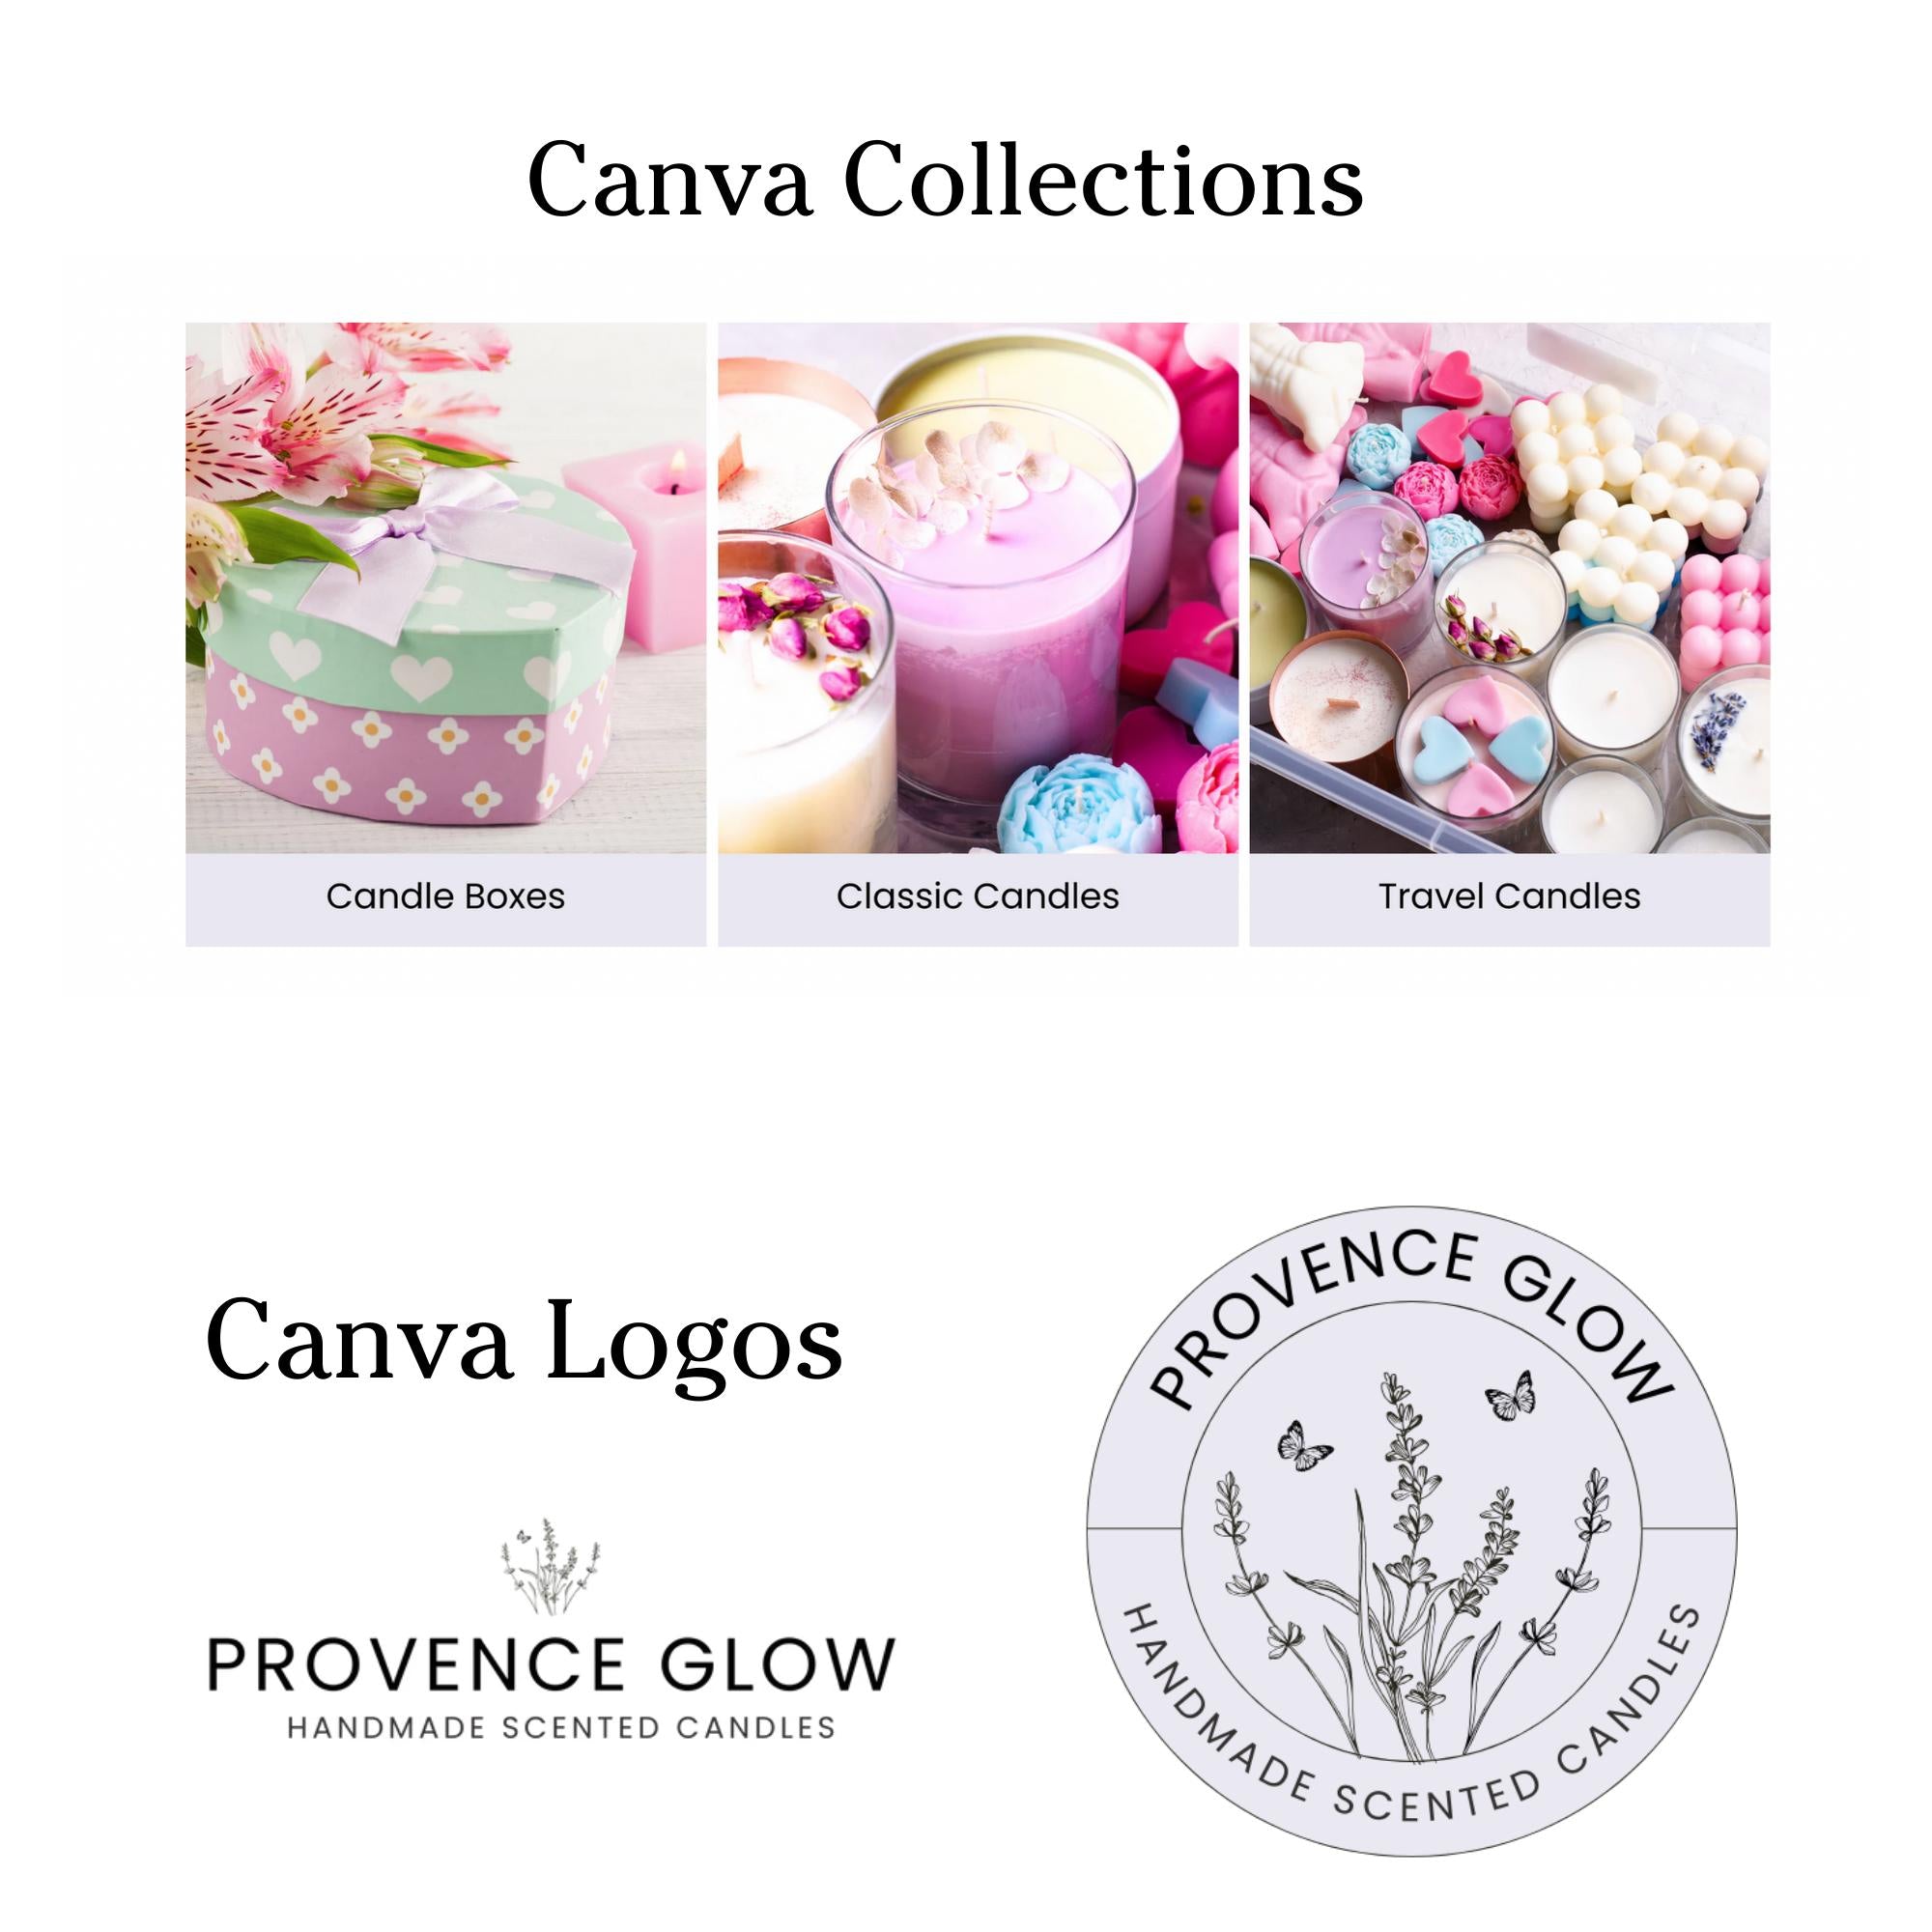 Luxury lavender candles shopify theme